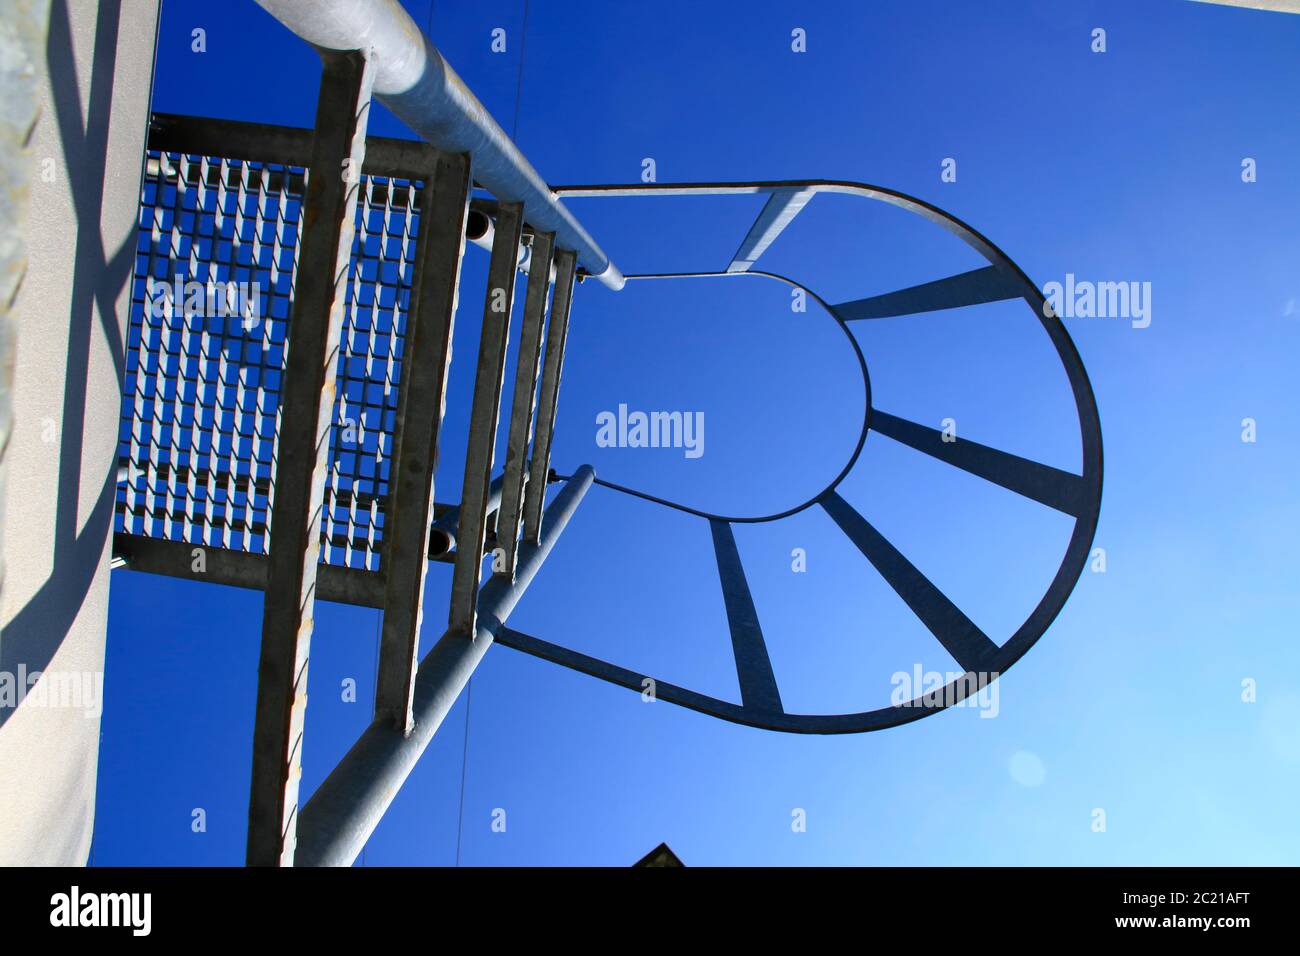 View from below of a ladder with safety bar. The look Symbolizes the ascent with certainty. Stock Photo